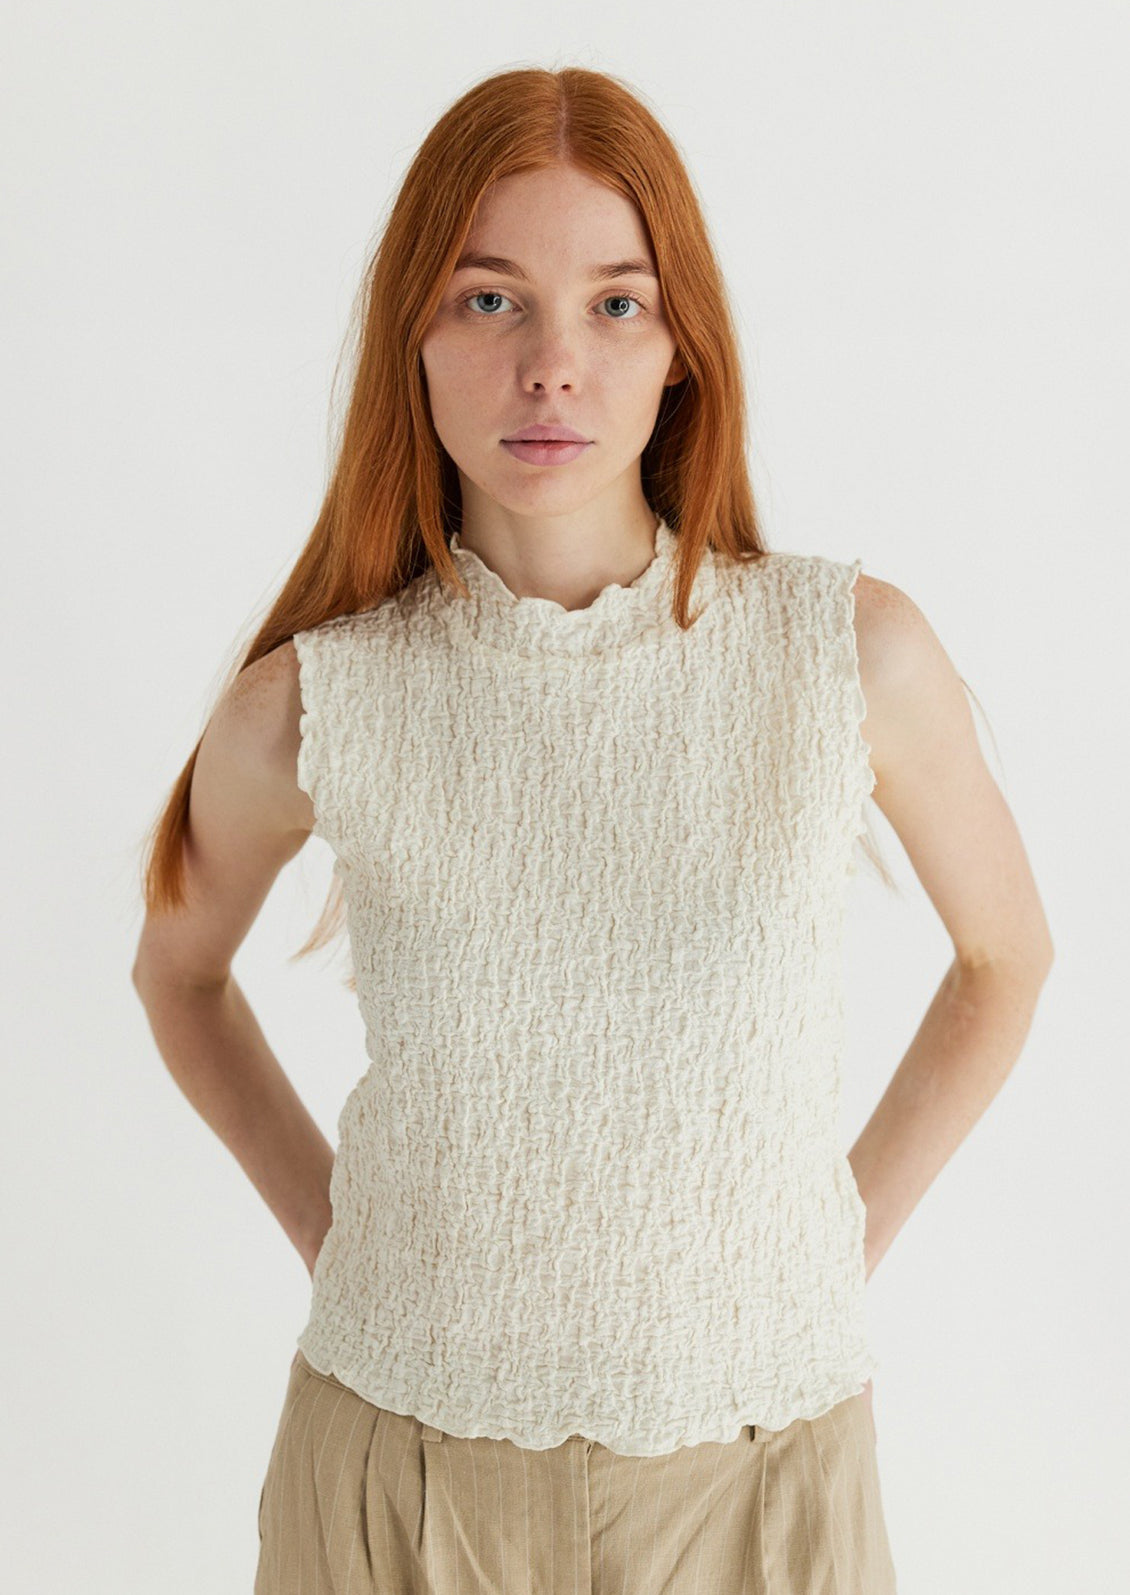 A woman wearing a sleeveless cream top with crinkled texture.